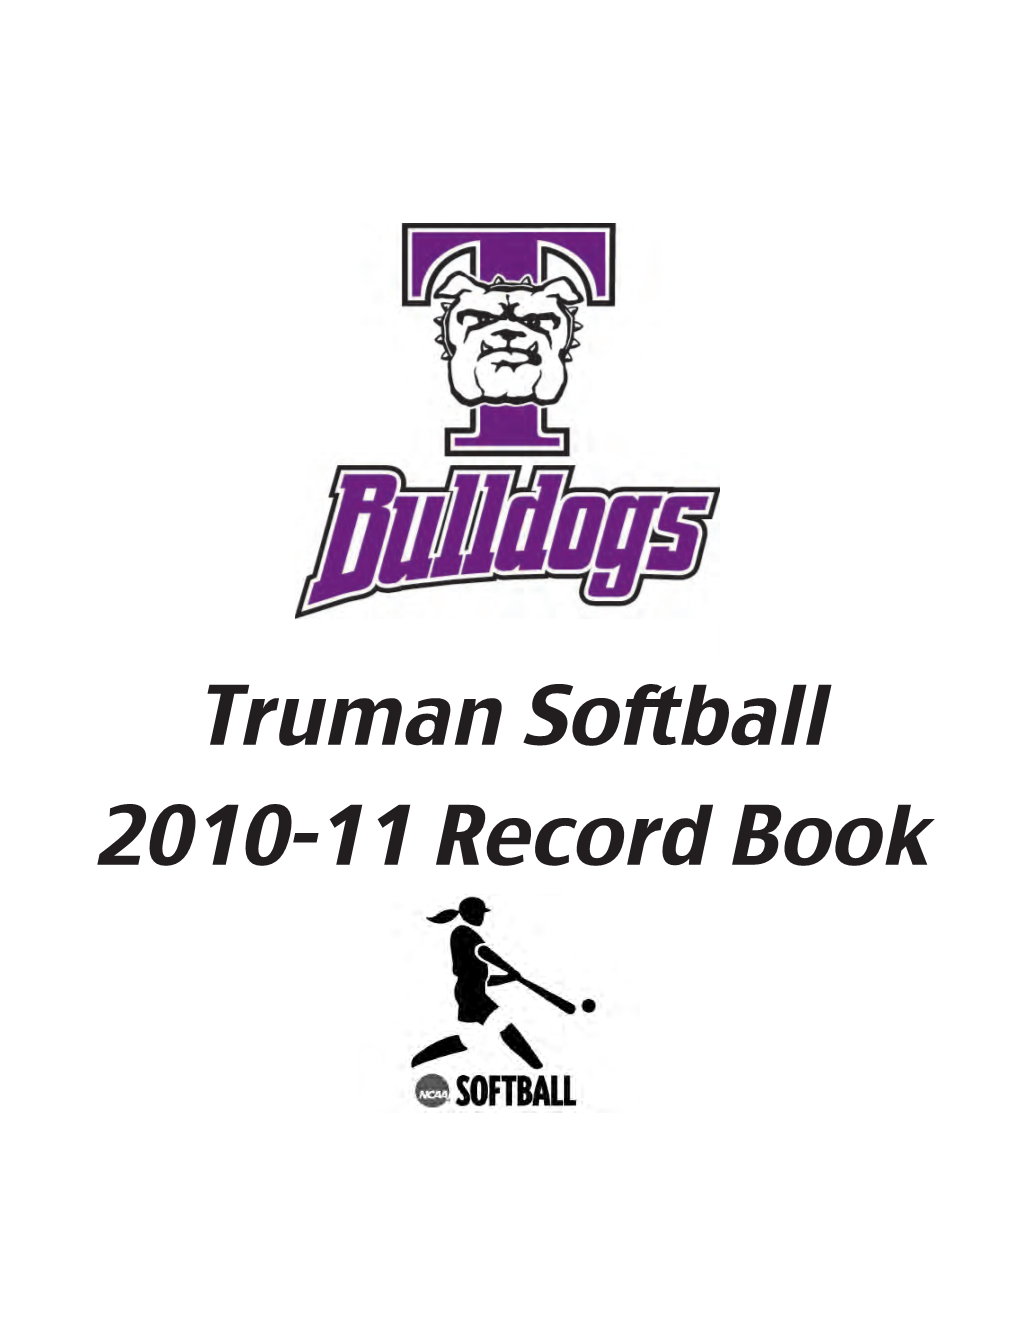 Truman Softball 2010-11 Record Book All-Americans Tracy ROWAN Frankie Demouth AIAW First Team NCAA First Team 1981 (Outfielder) 1982 (First BASE) Stats Stats Yr